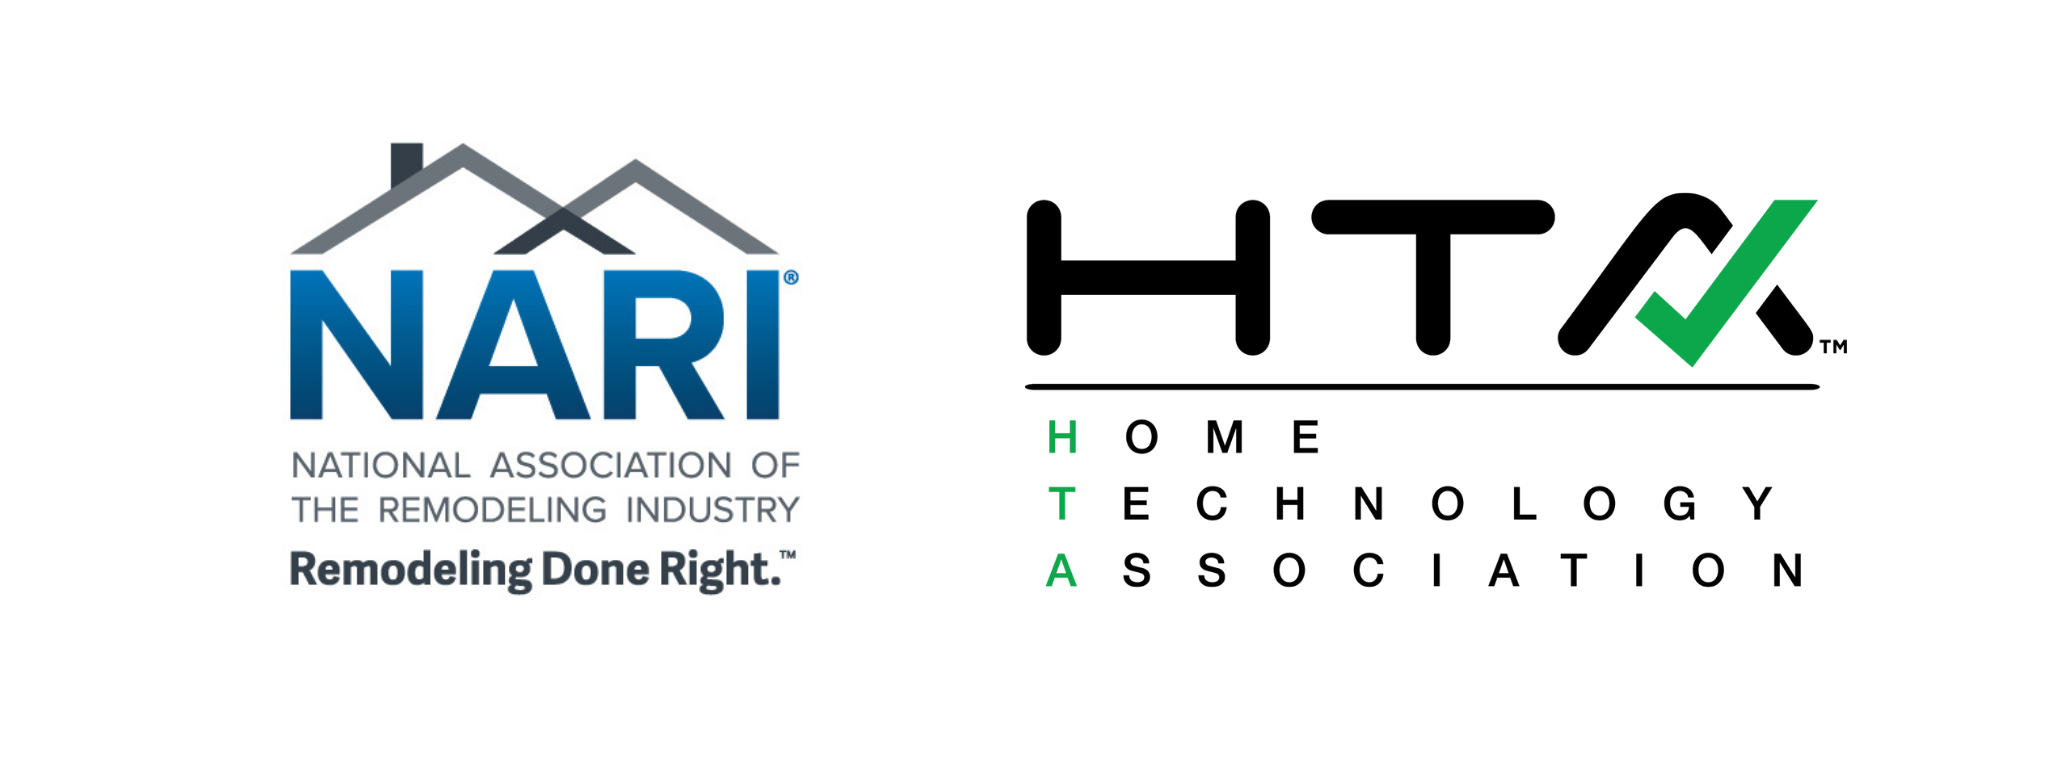 Home Technology Association Announces Collaboration with the National Association of the Remodeling Industry (NARI)